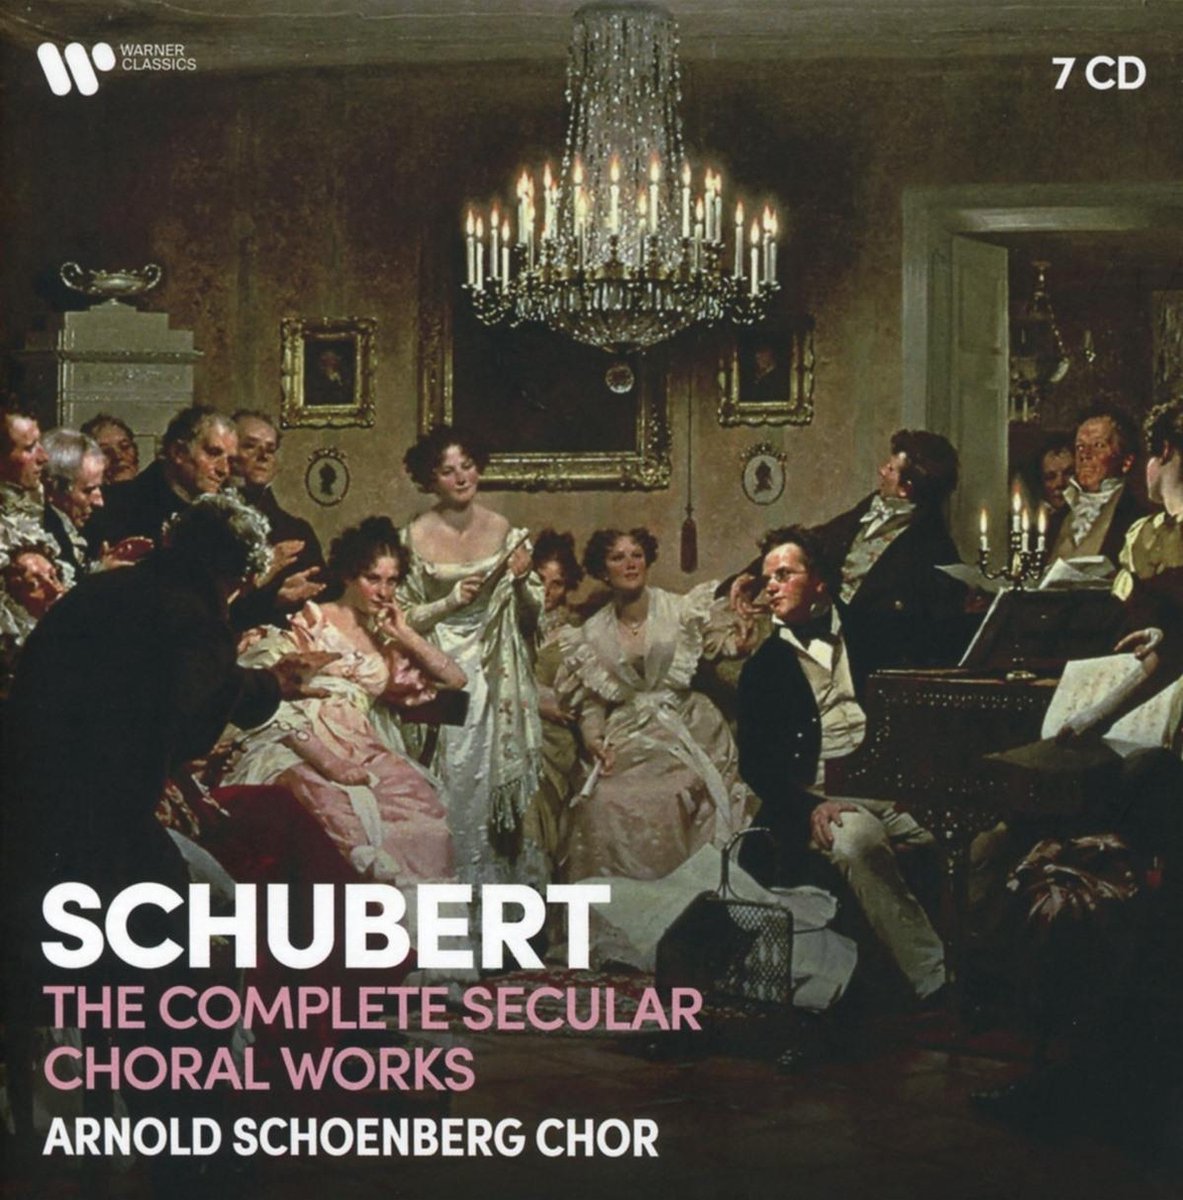 The Complete Secular Choral Works | Franz Schubert